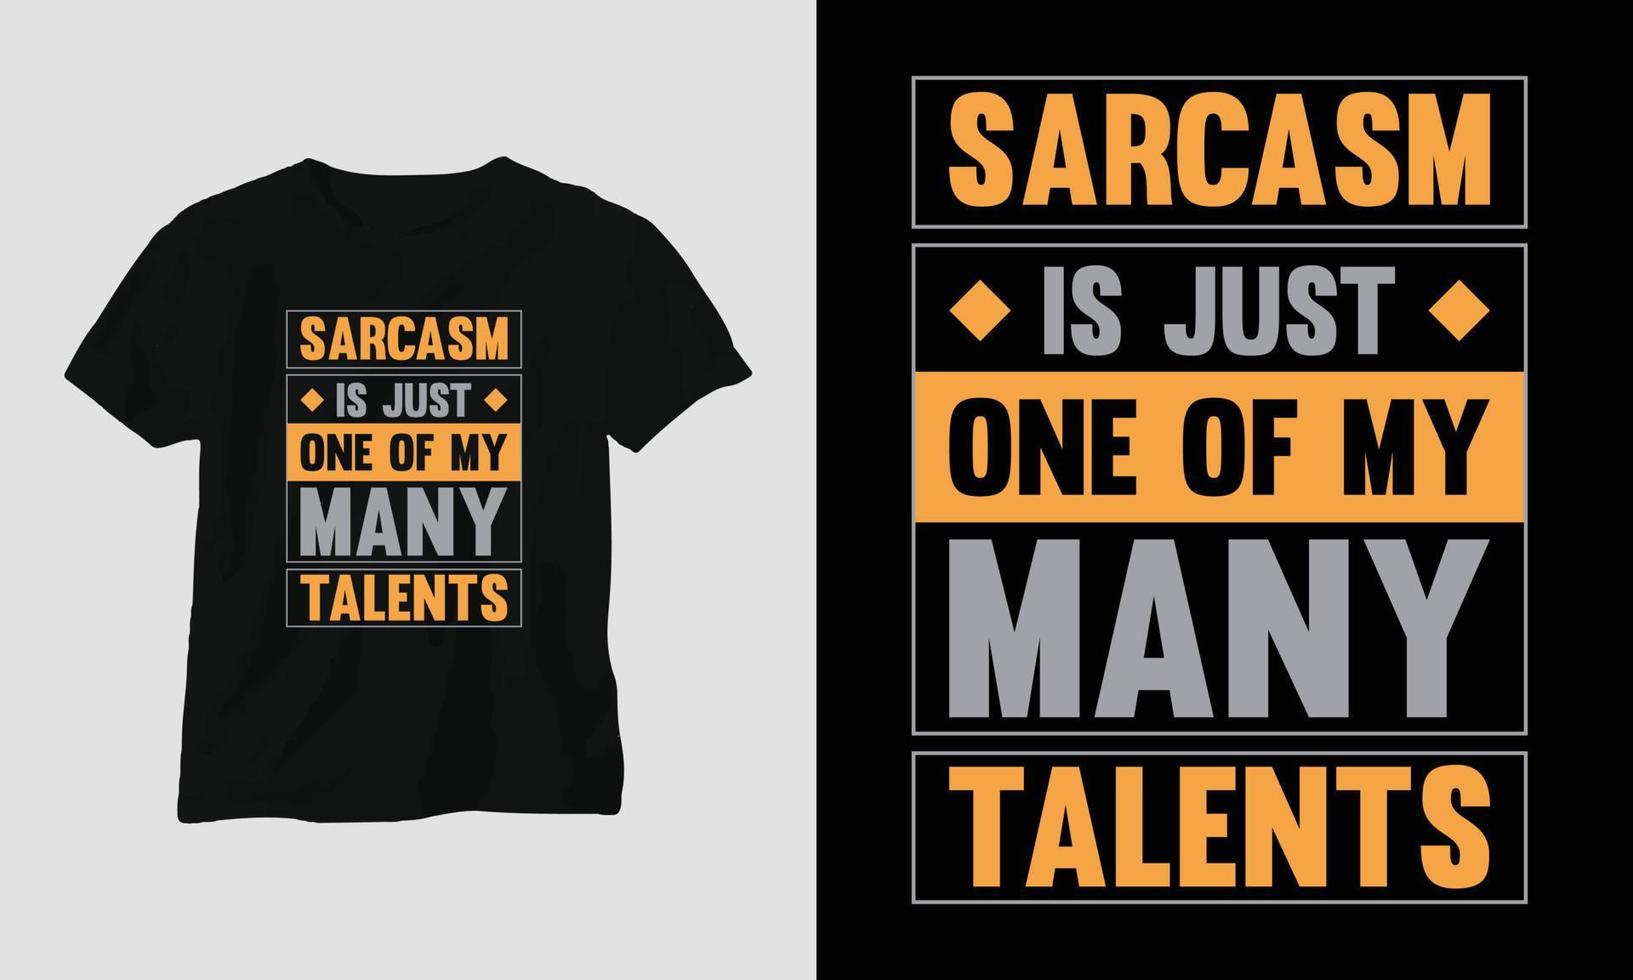 sarcasm is just one of my many talents - Sarcasm Typography T-shirt and apparel design vector